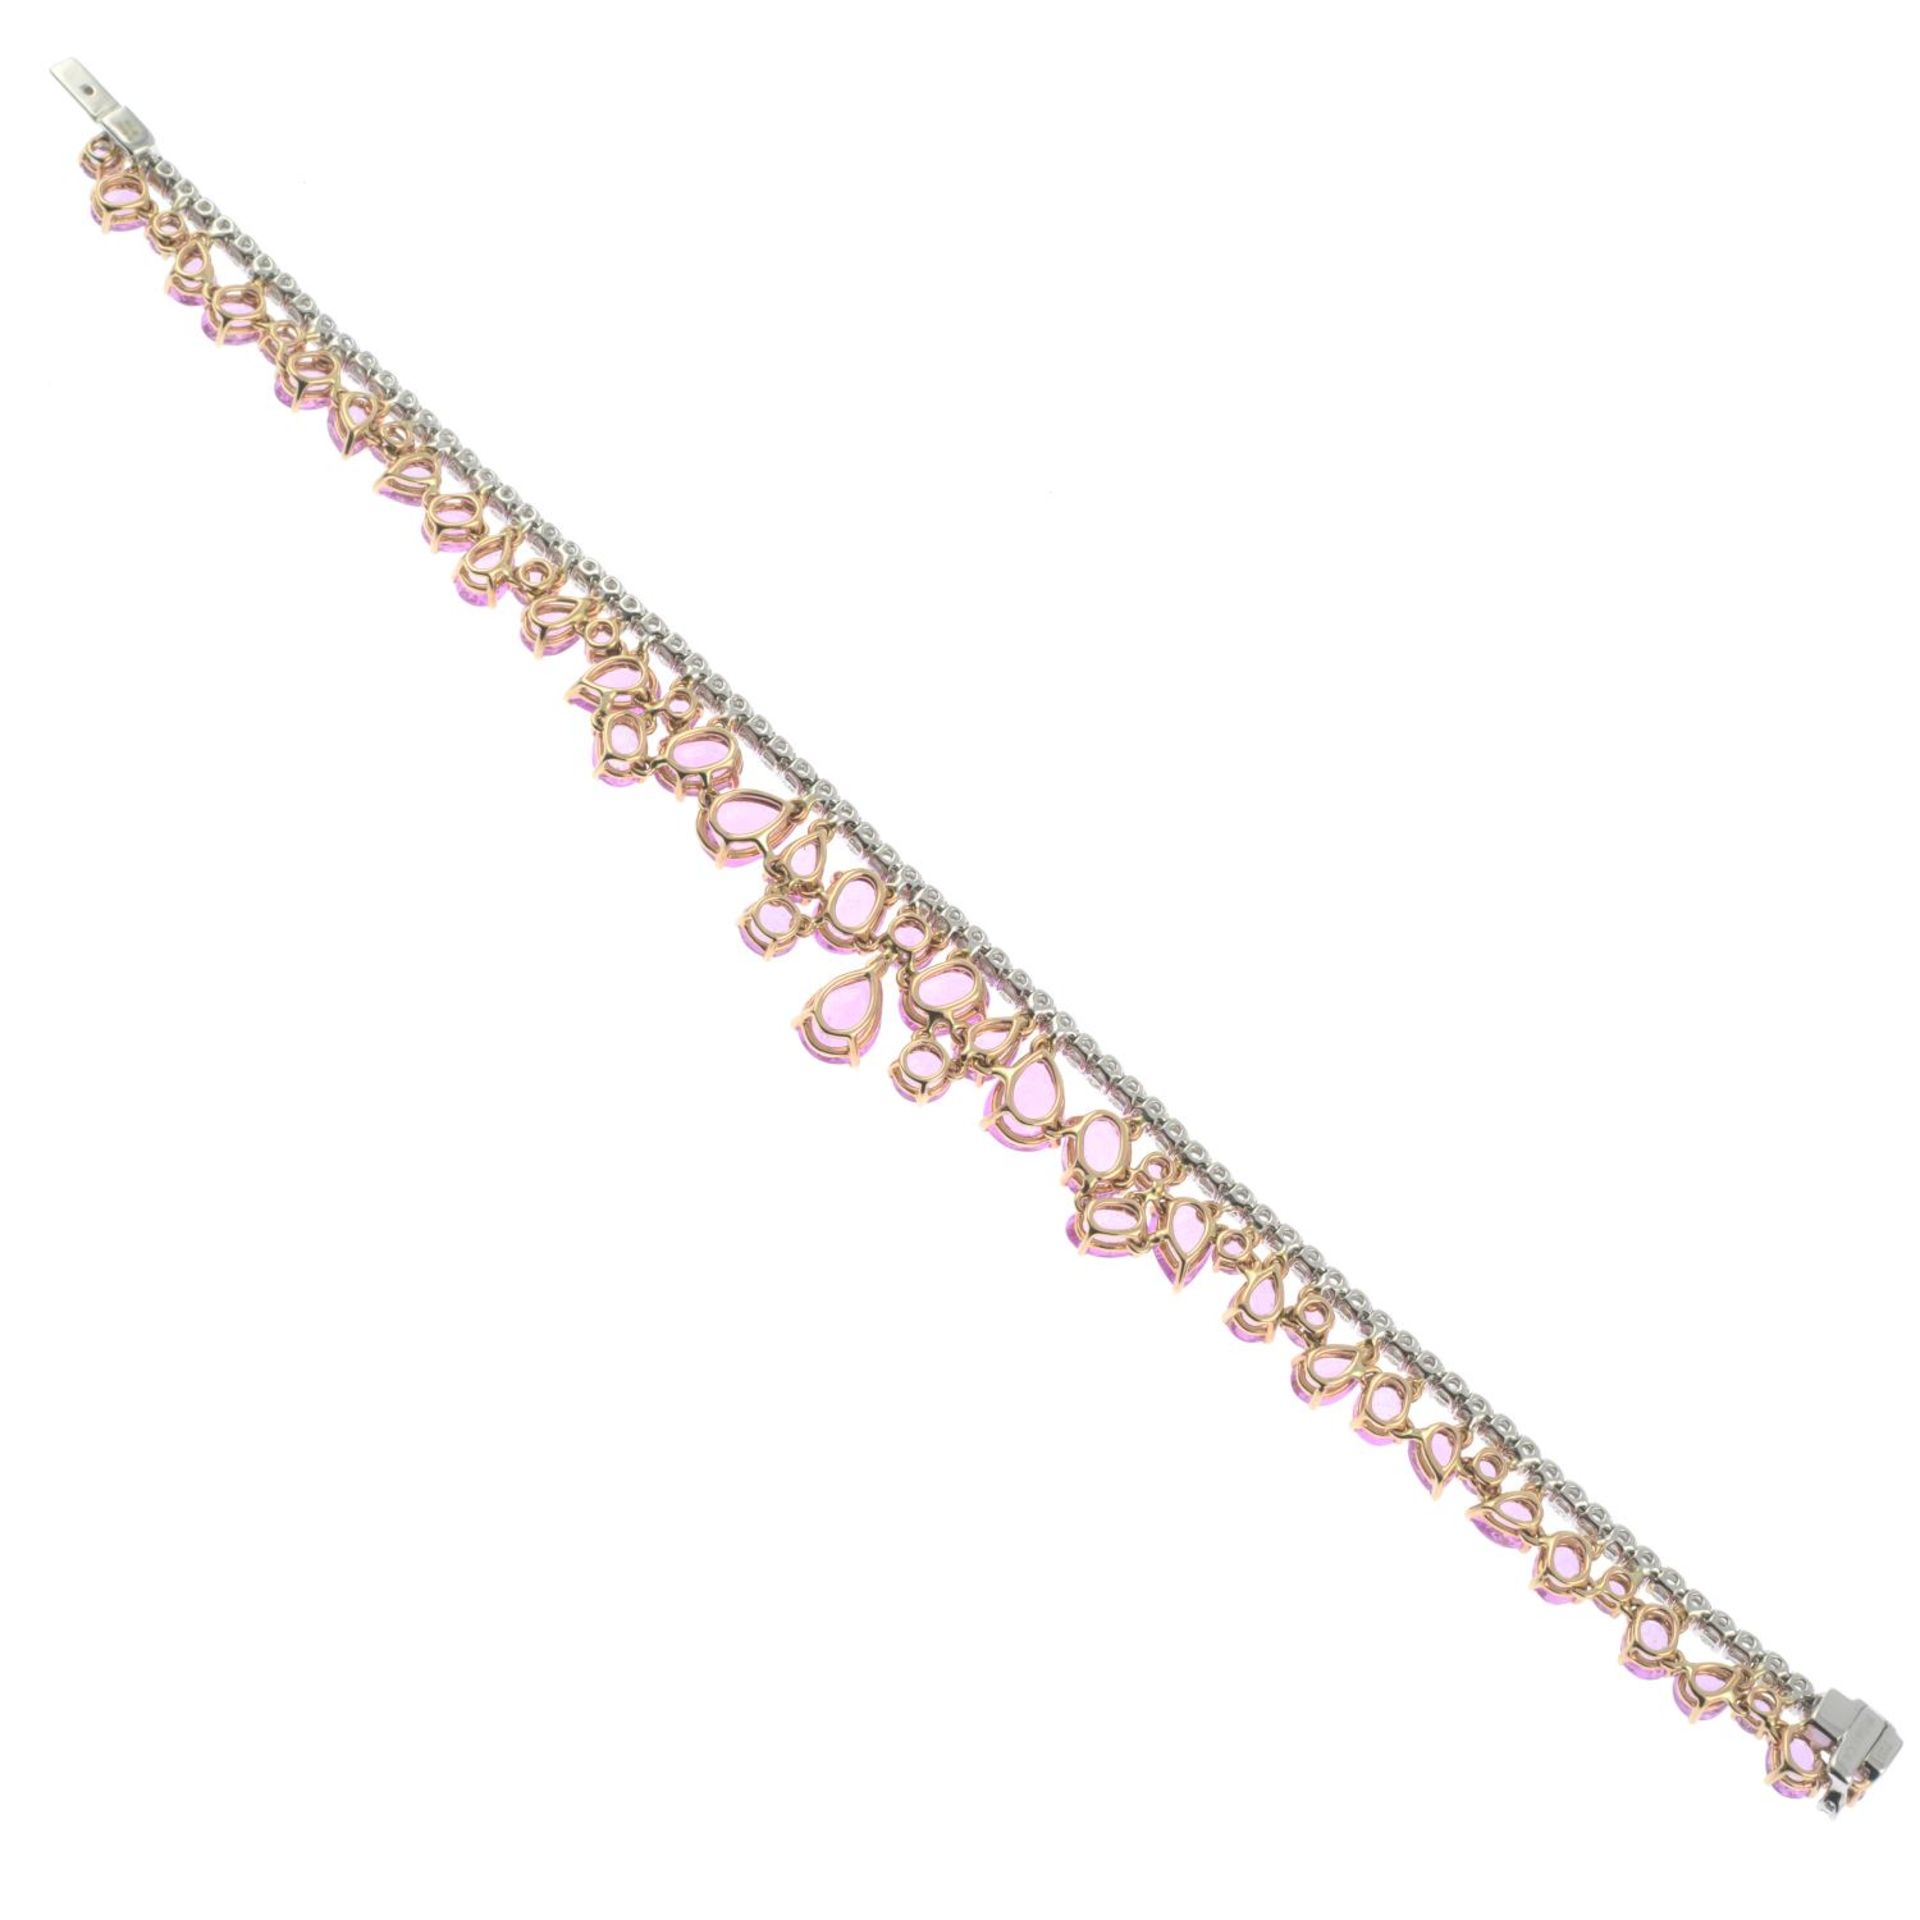 An 18ct gold pink sapphire and diamond 'Beneath the Rose' bracelet. - Image 3 of 3